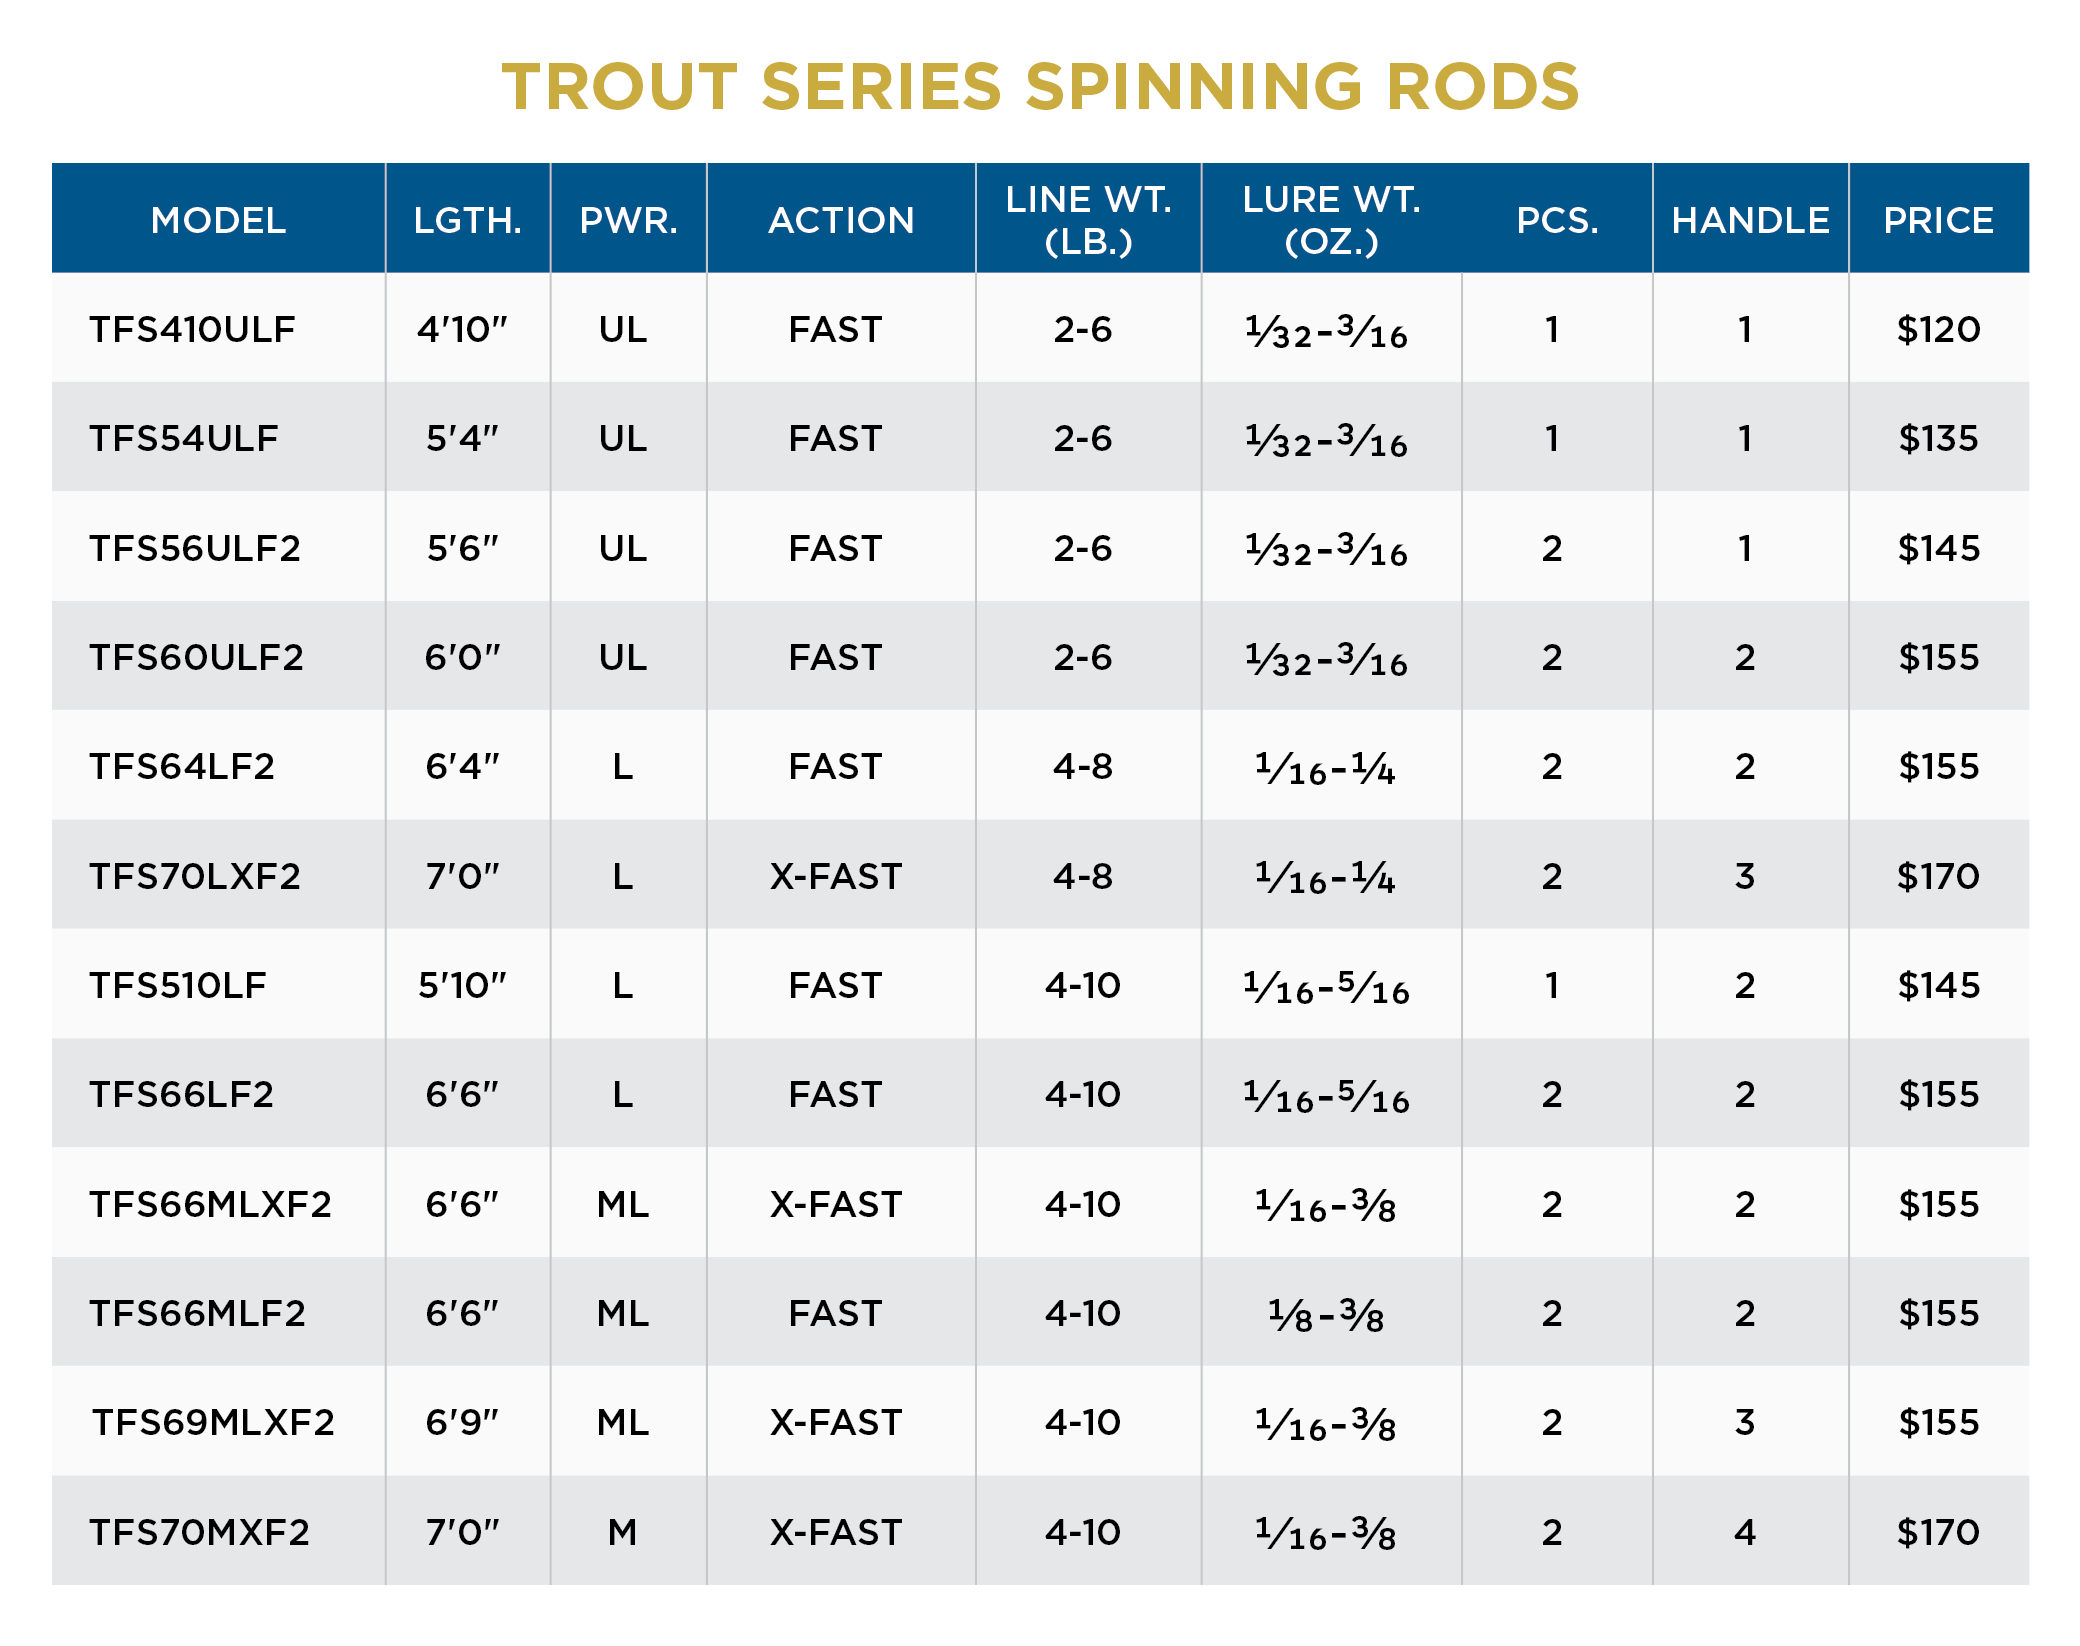 ST. CROIX TROUT SERIES SPINNING RODS